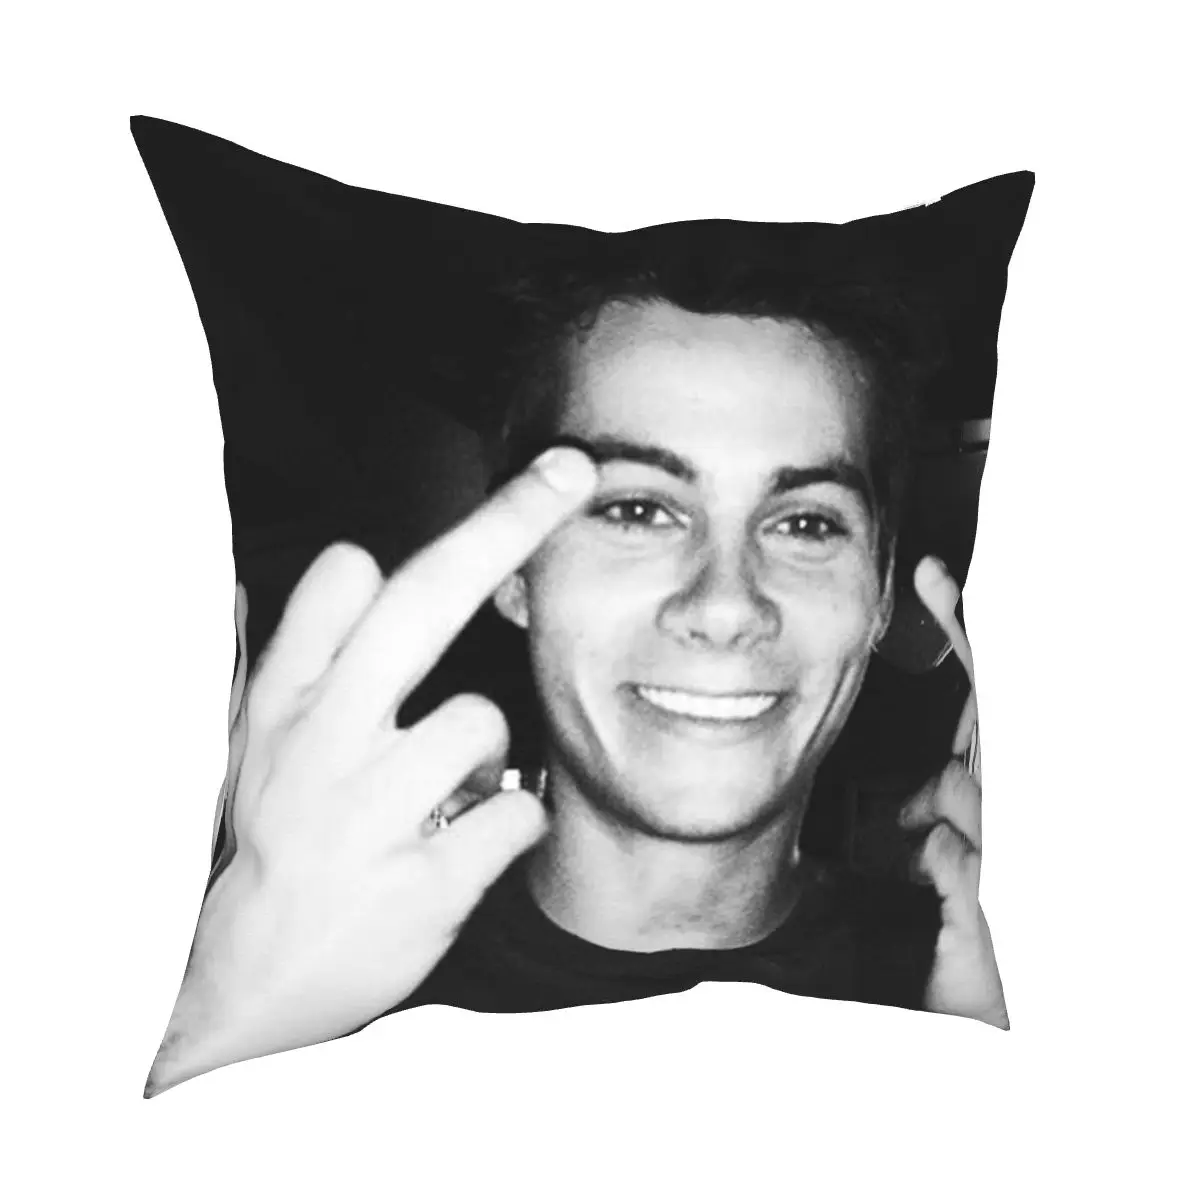 

Dylan O'Brien Teen Wolf Pillows Polyester Pillows Cover Gift Maze Runner Thomas Kissen Case Coverage House Square 40*40cm